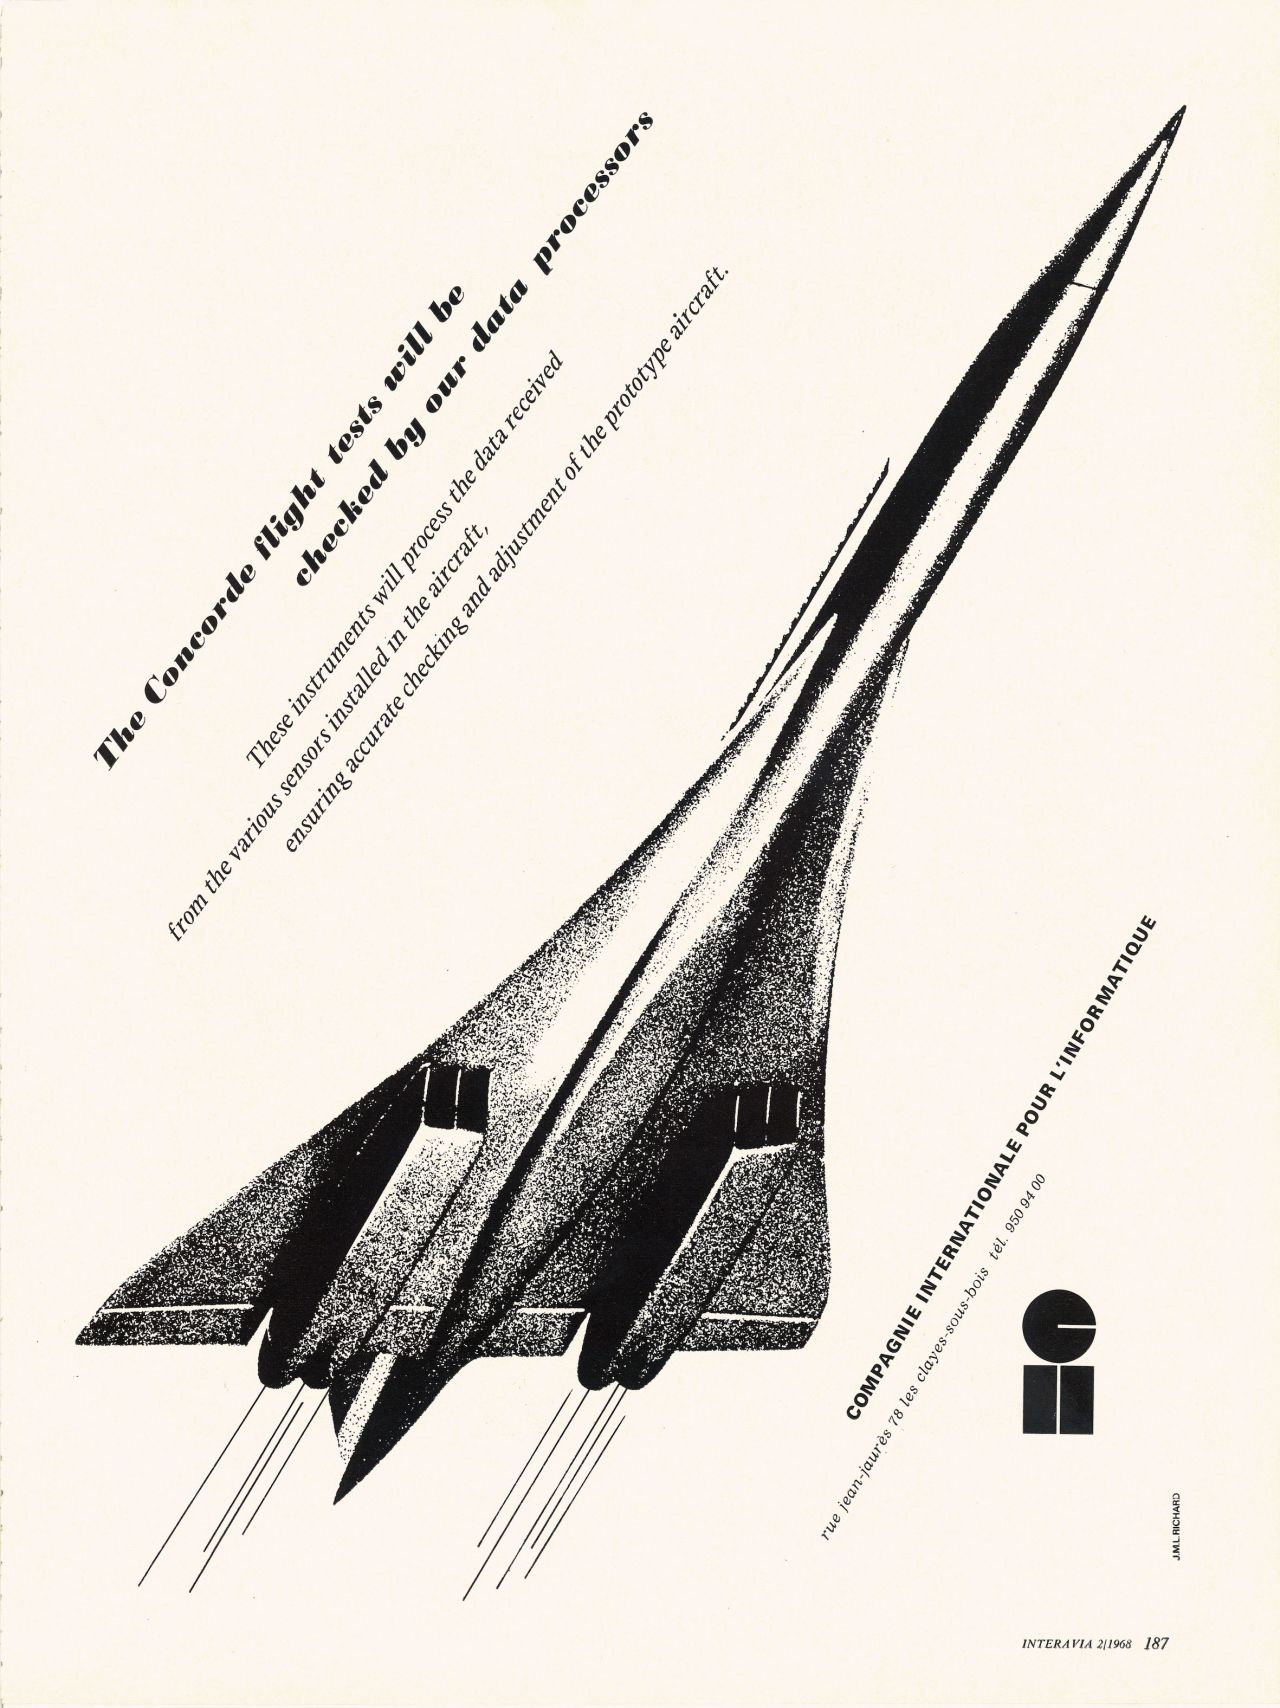 An ad campaign featuring Concorde from 1968.